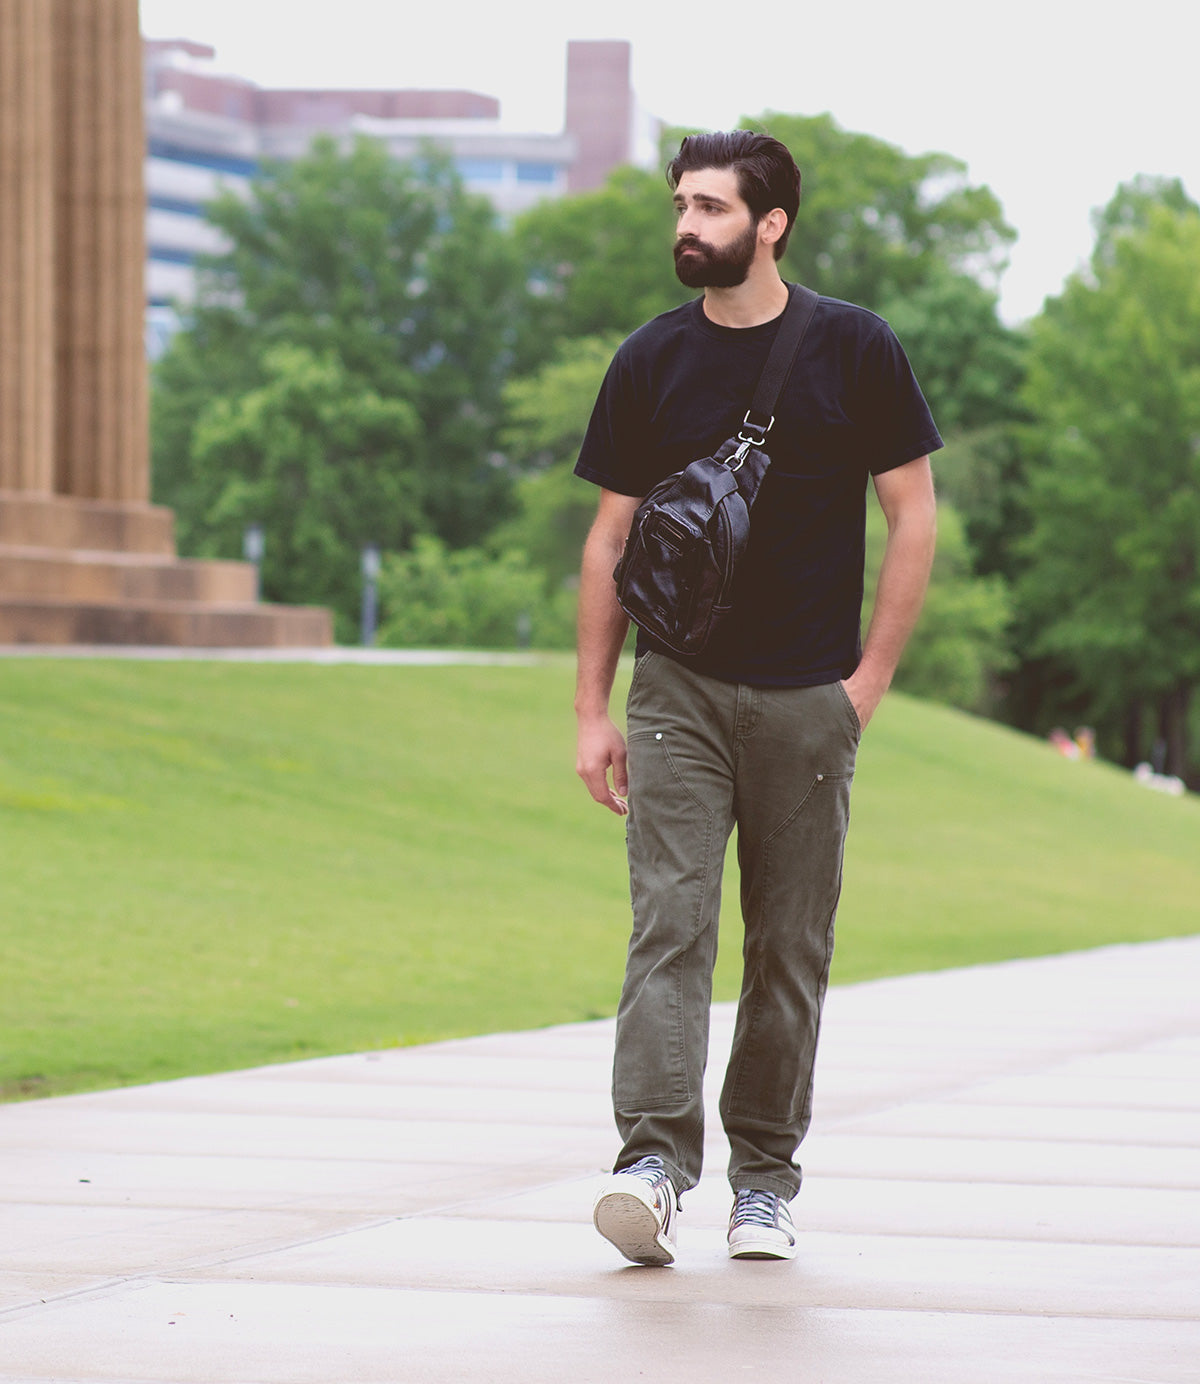 A man with a beard walks on a sidewalk in an outdoor urban park. He is wearing a black t-shirt, green pants, and white sneakers, and he carries a high-quality black crossbody bag from the Bed|Stü Men's Shop the Look' Bundle Package Price!